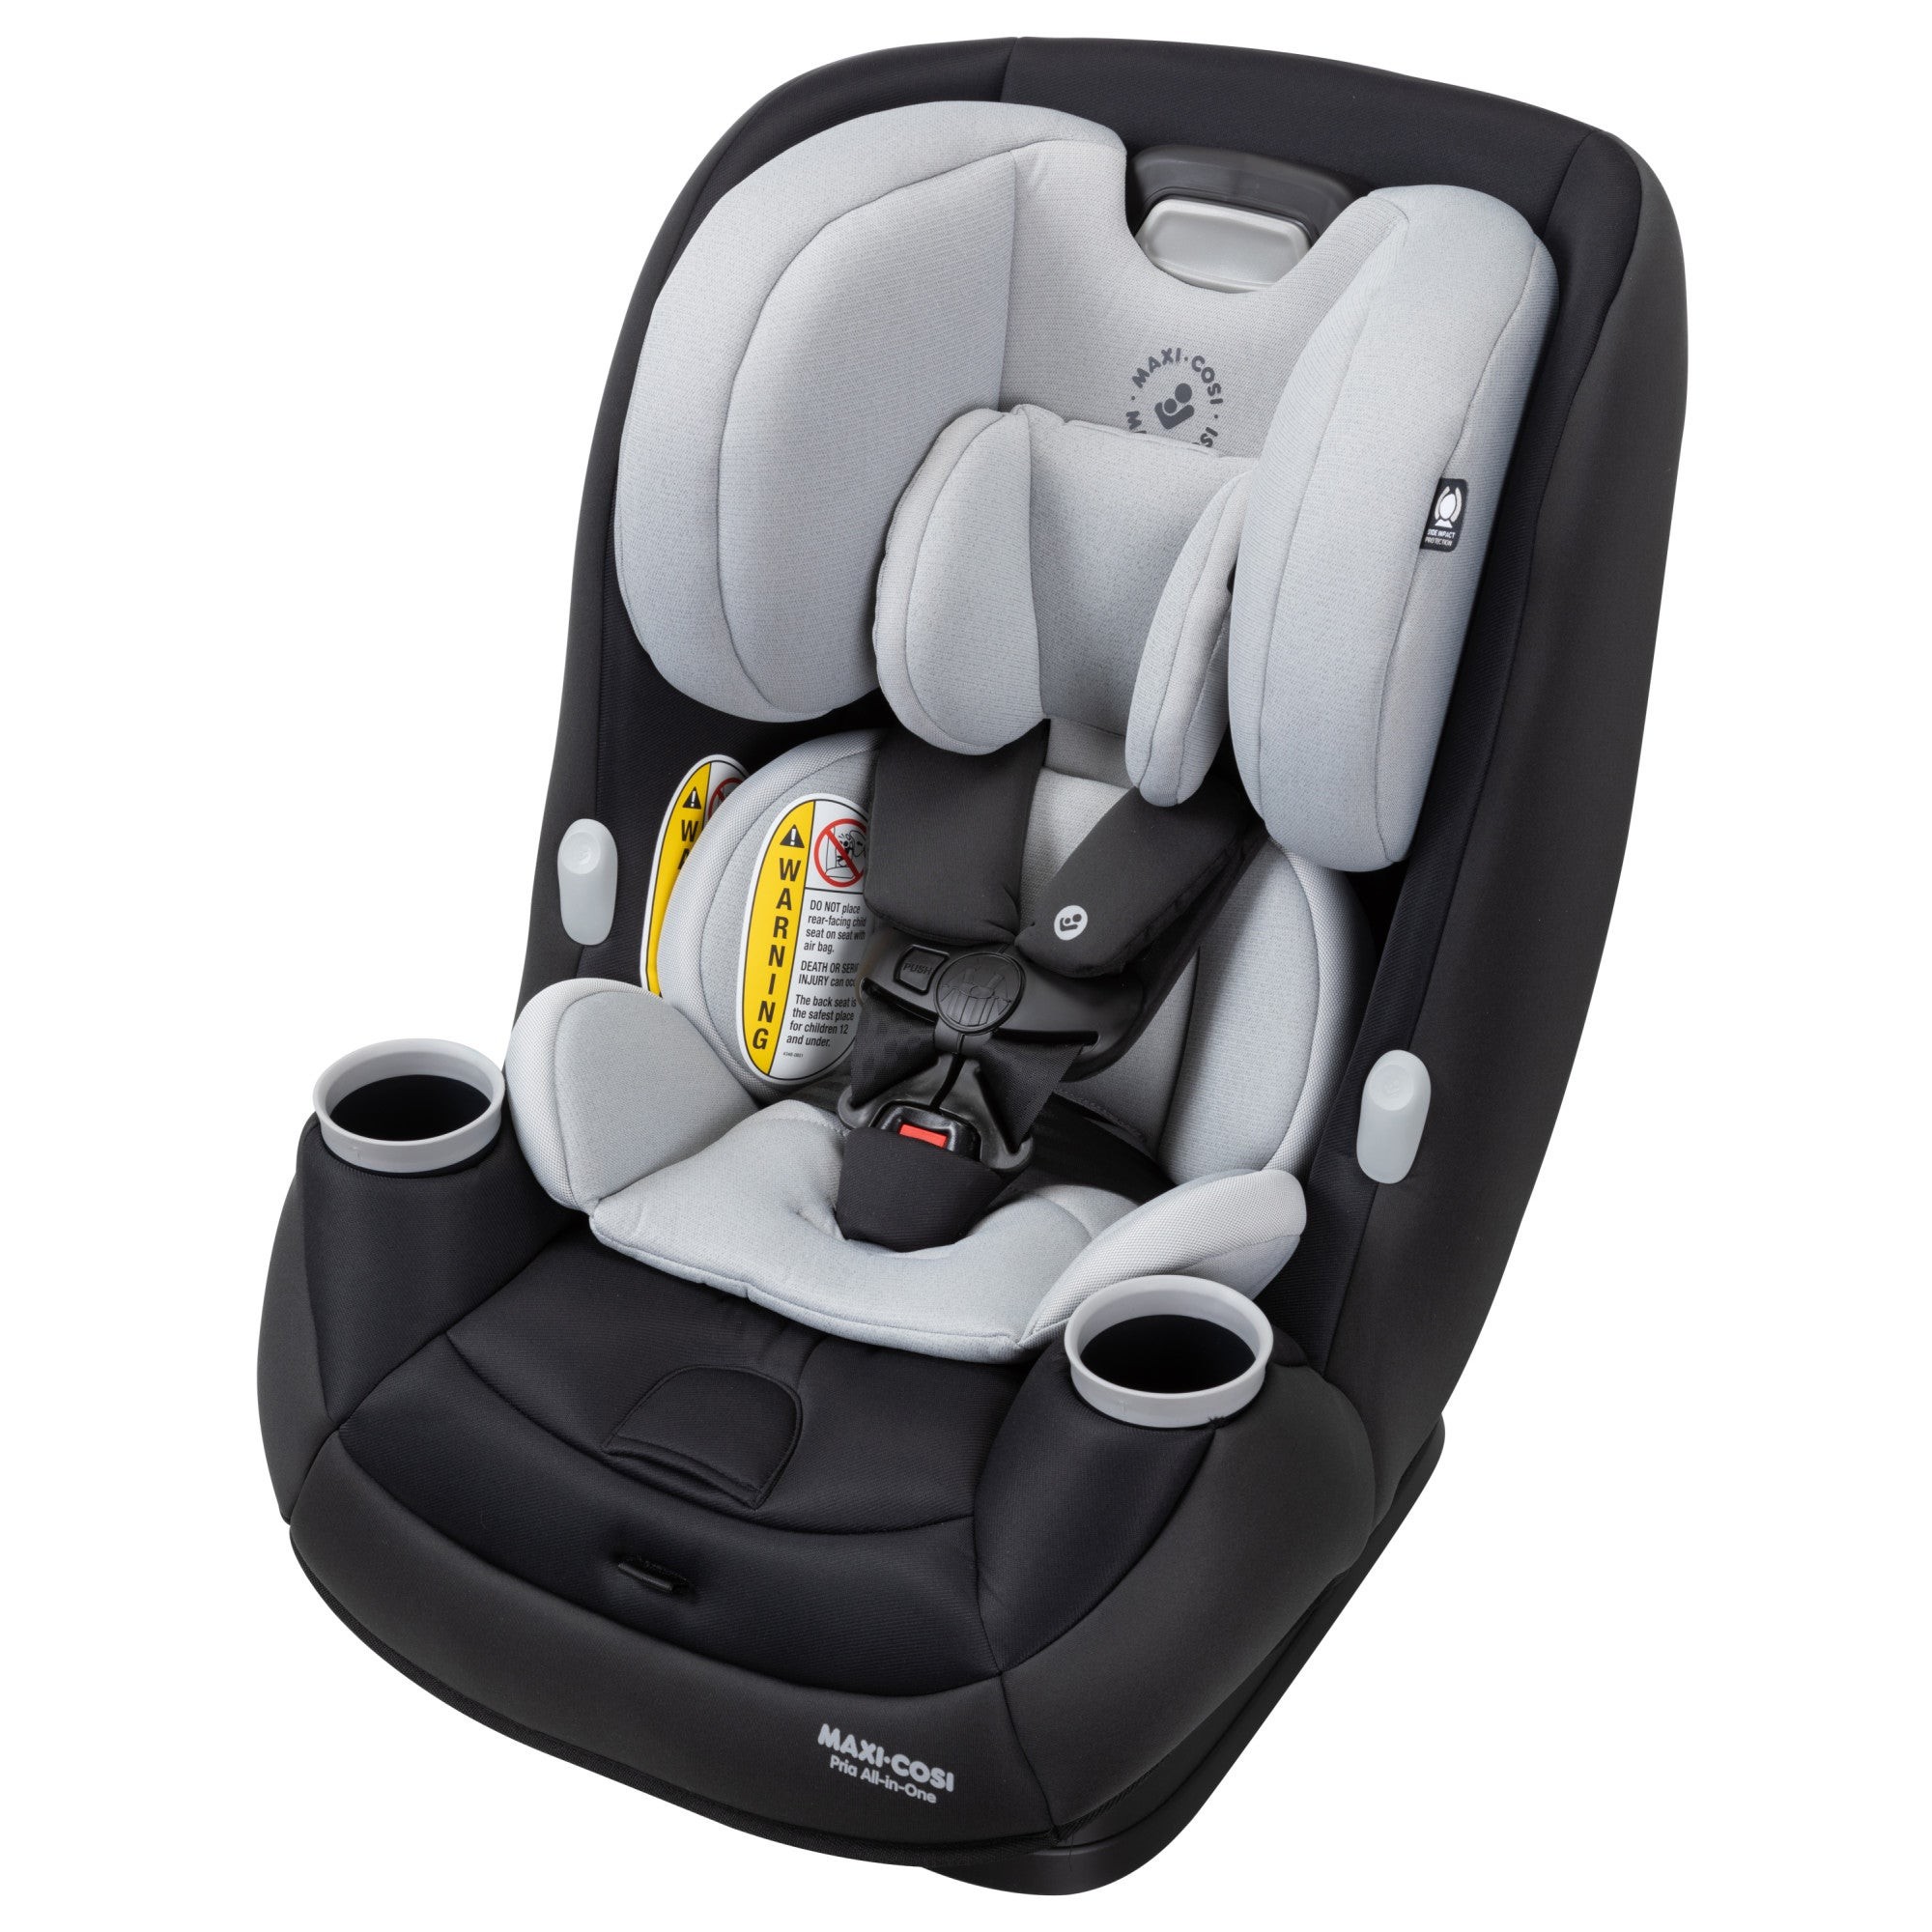 Pria All-in-One Convertible Car Seat After Dark